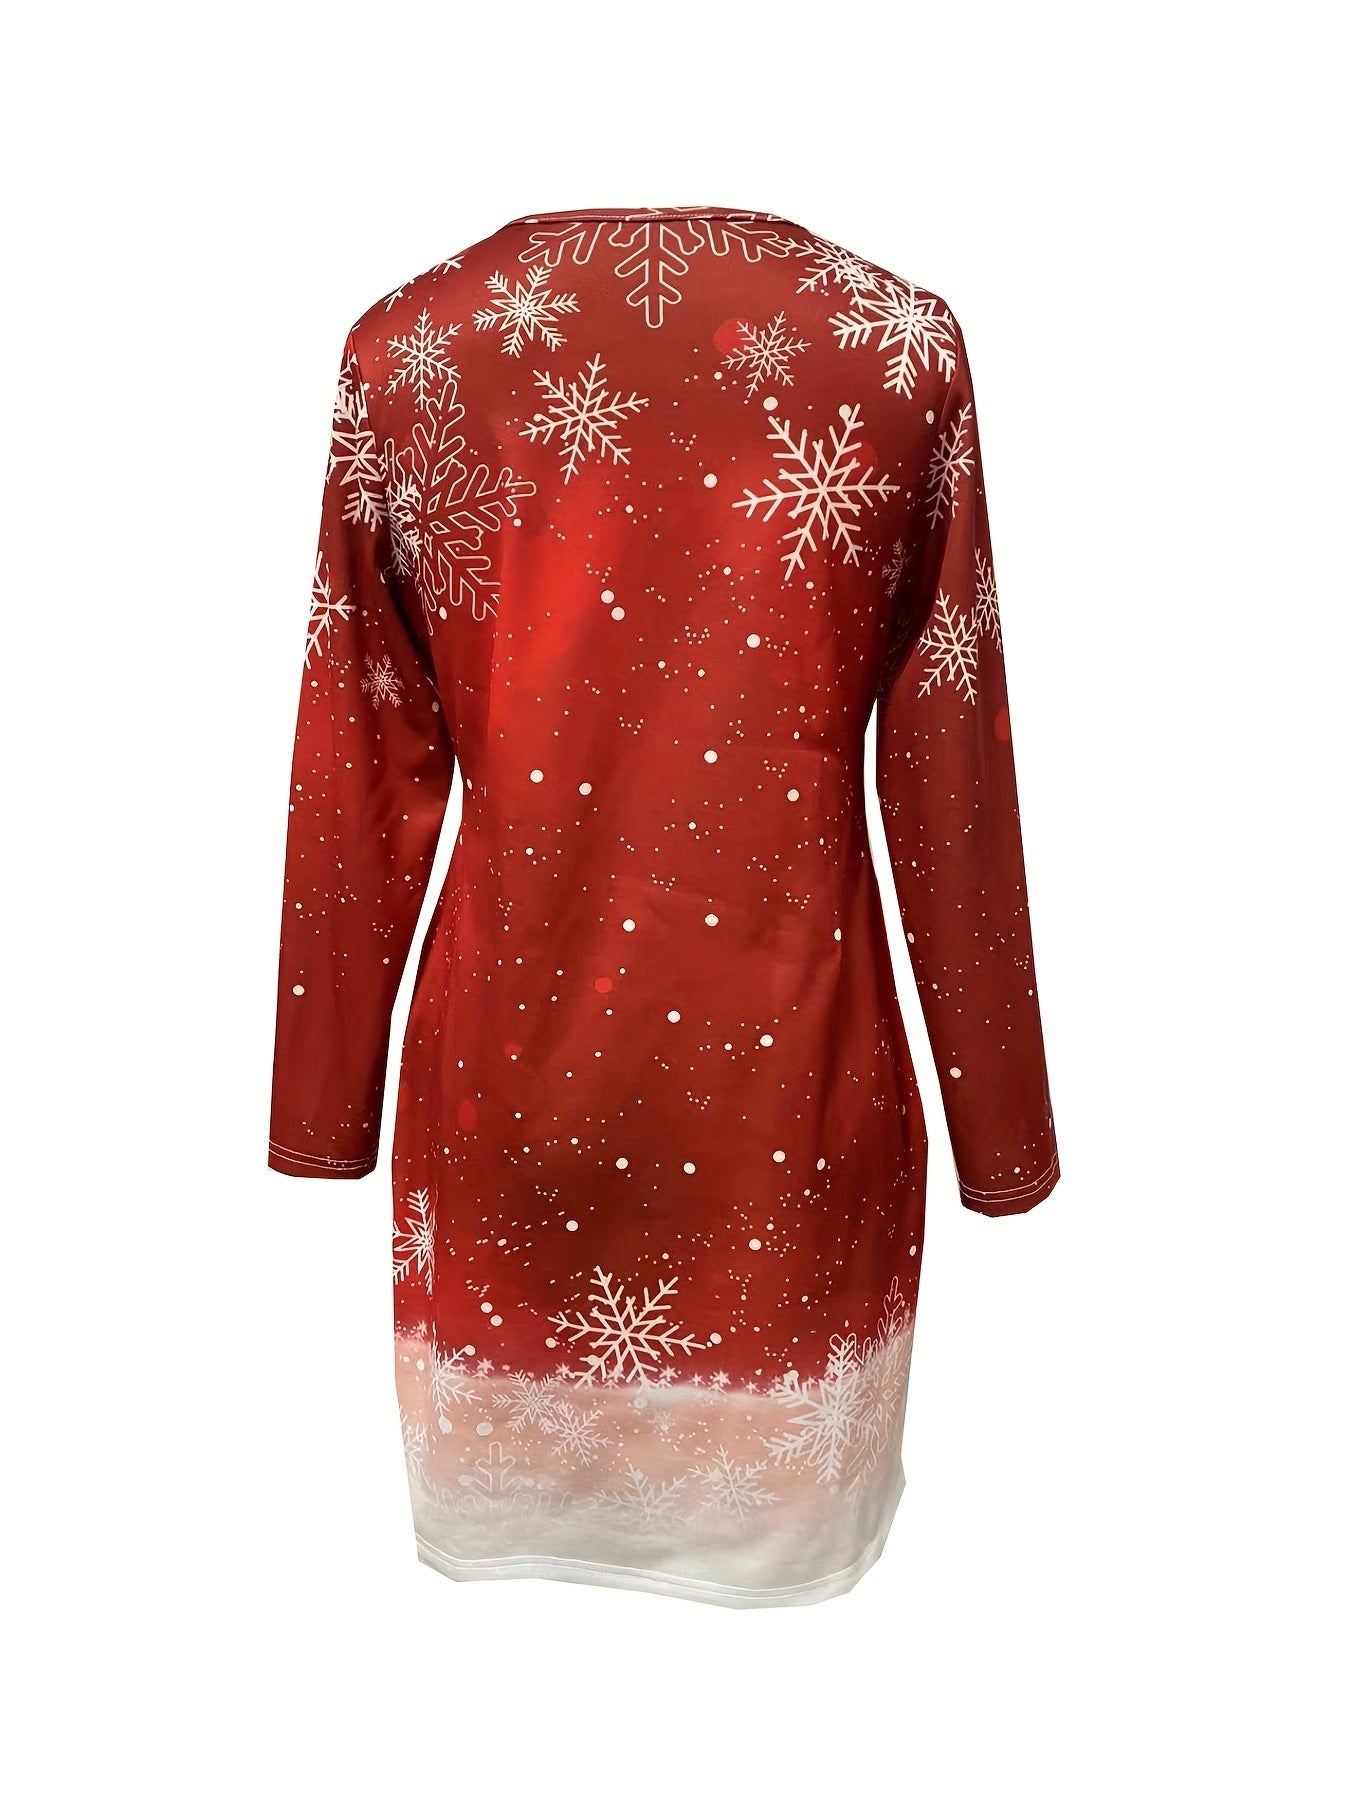 Snowman Print Long Sleeve Dress, Casual Crew Neck Dress For Spring & Fall, Women's Clothing